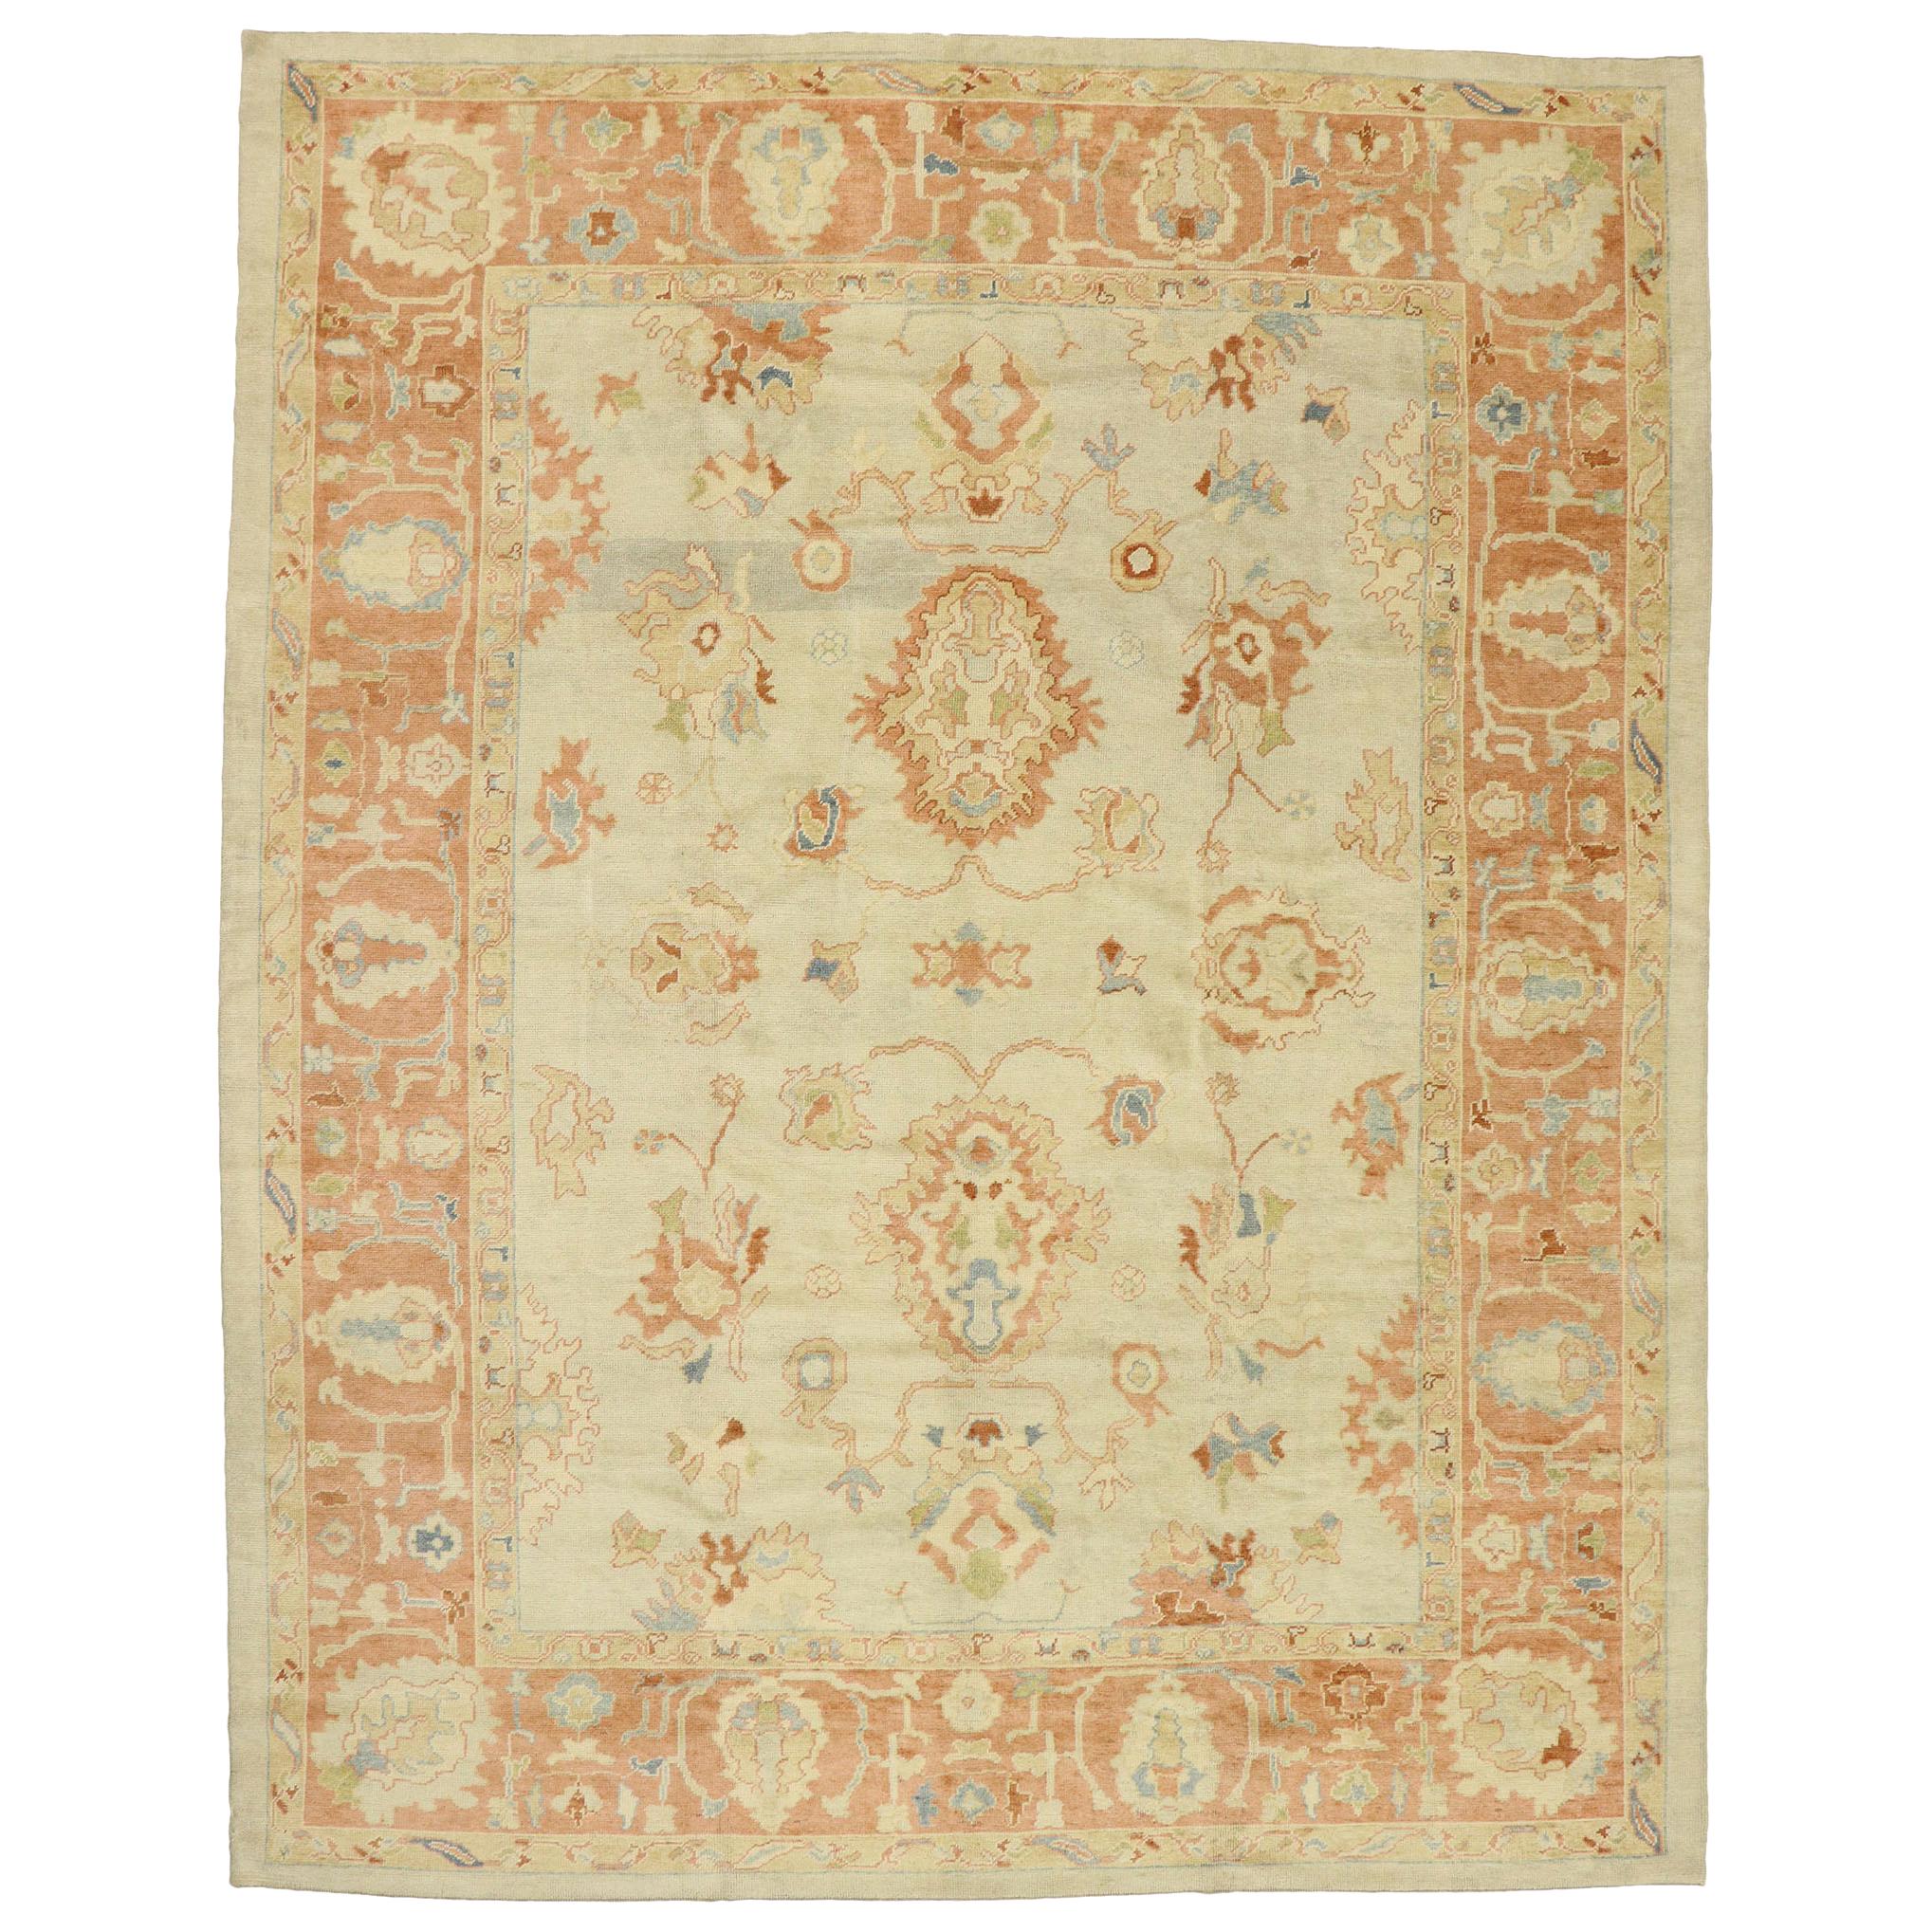 New Contemporary Turkish Oushak Rug with Transitional Spanish Revival Style For Sale